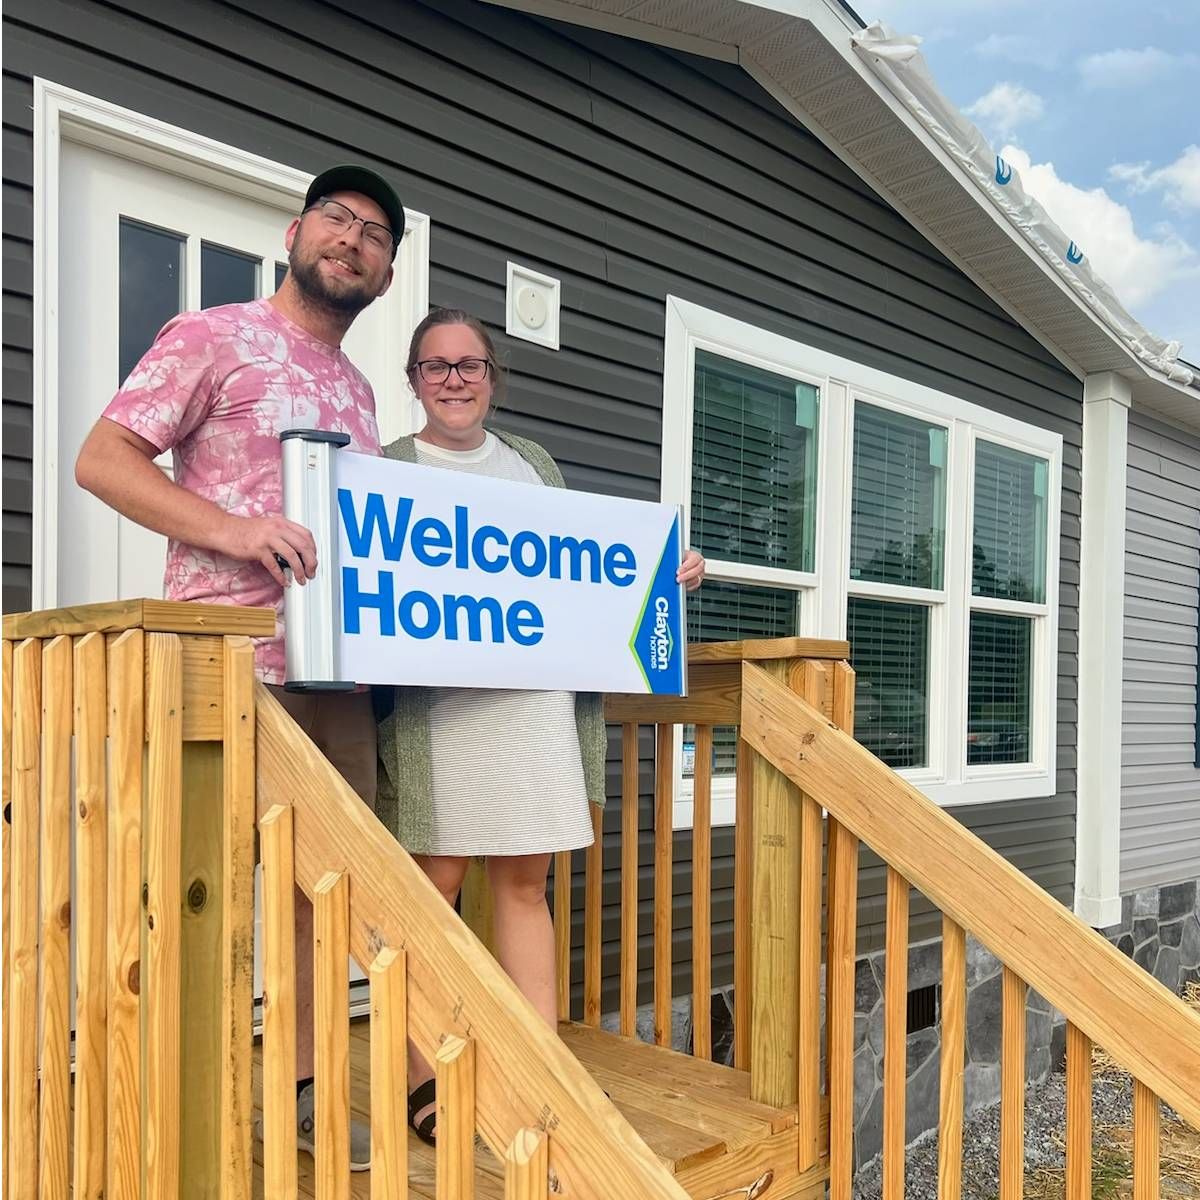 TAYLOR K. welcome home image